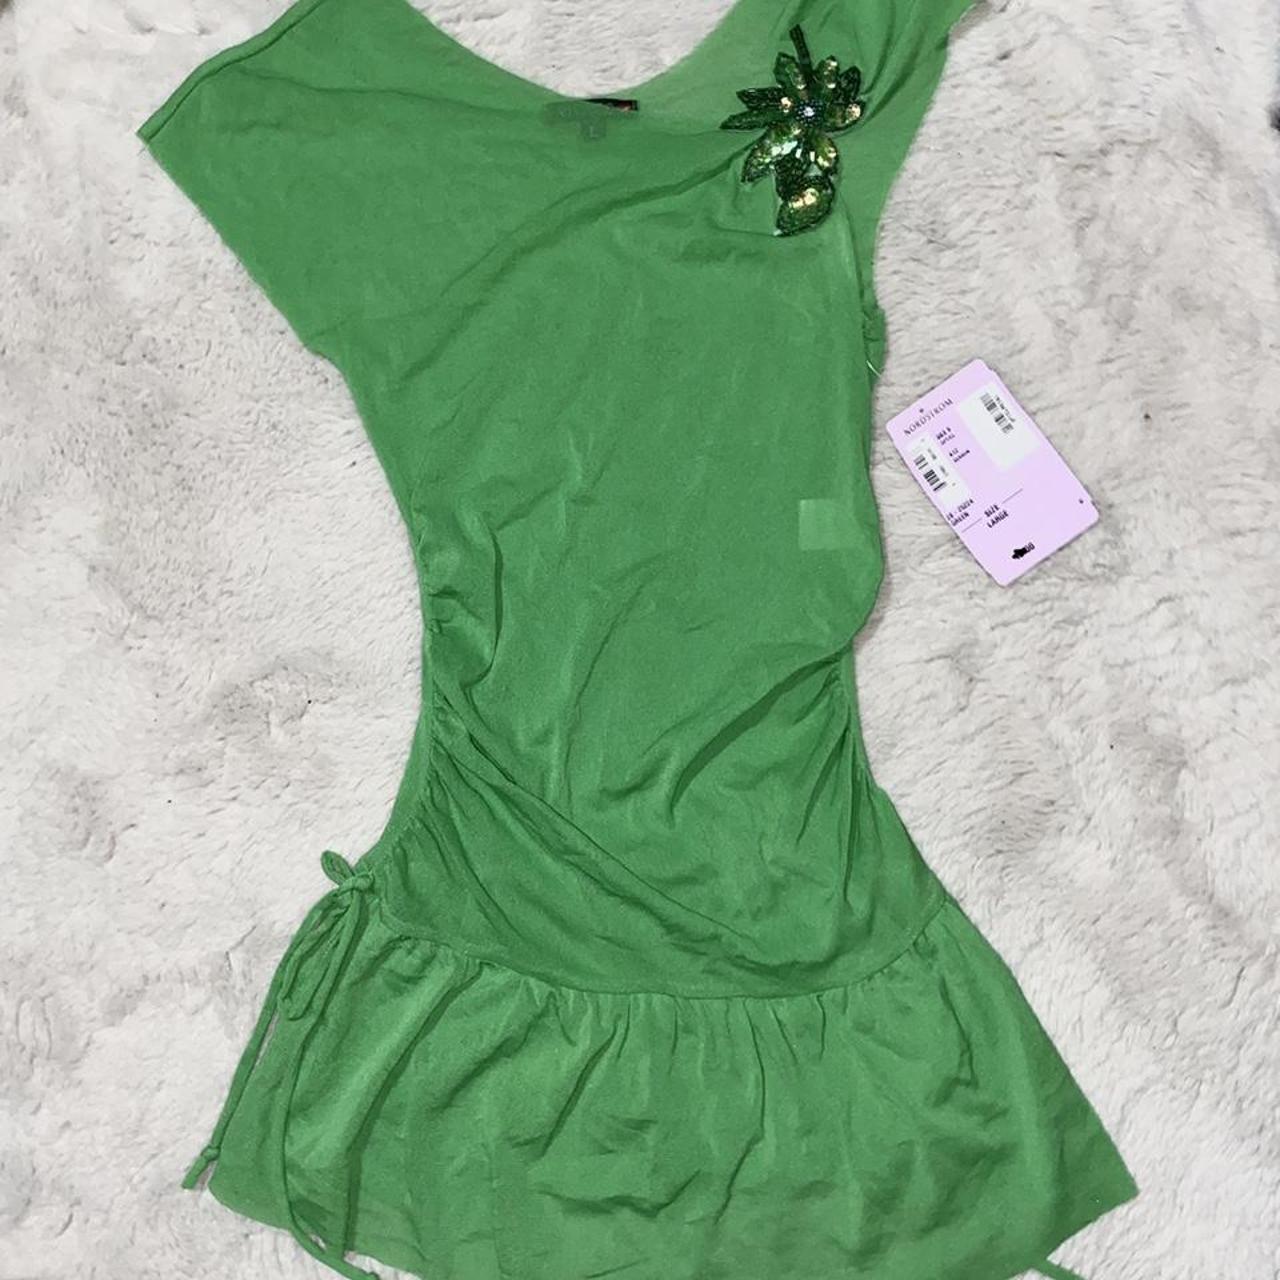 Cute vintage green bodycon dress Brand new with... - Depop